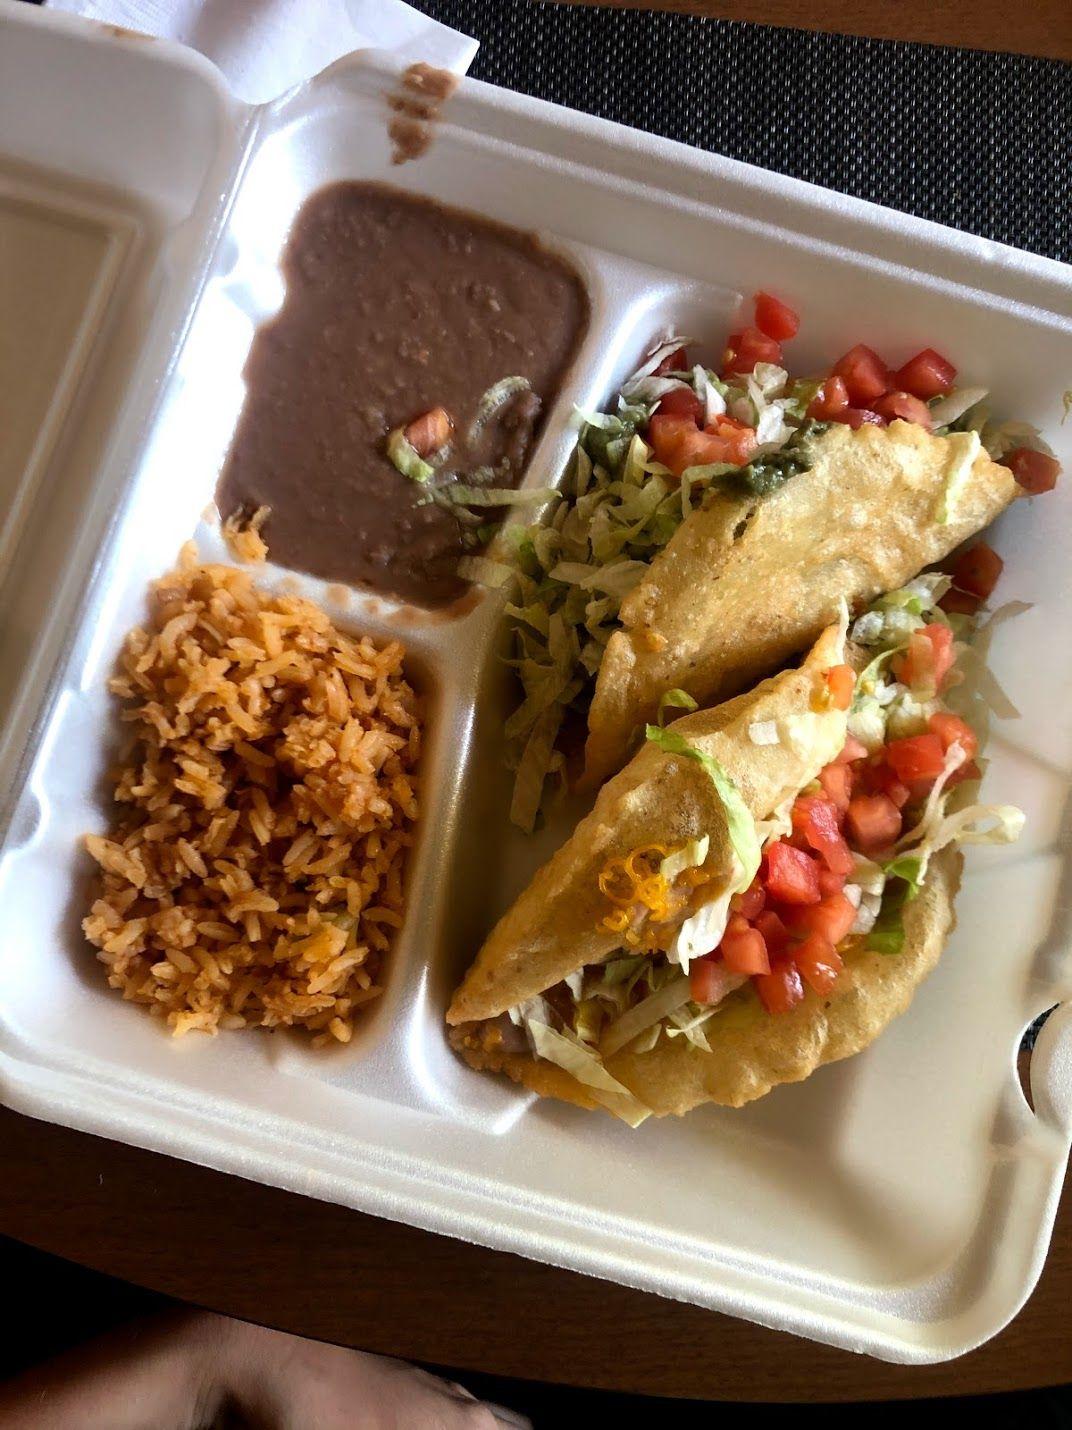 A take out box with tacos, refried beans and rice. The taco shells look like puffy tortilla chips.